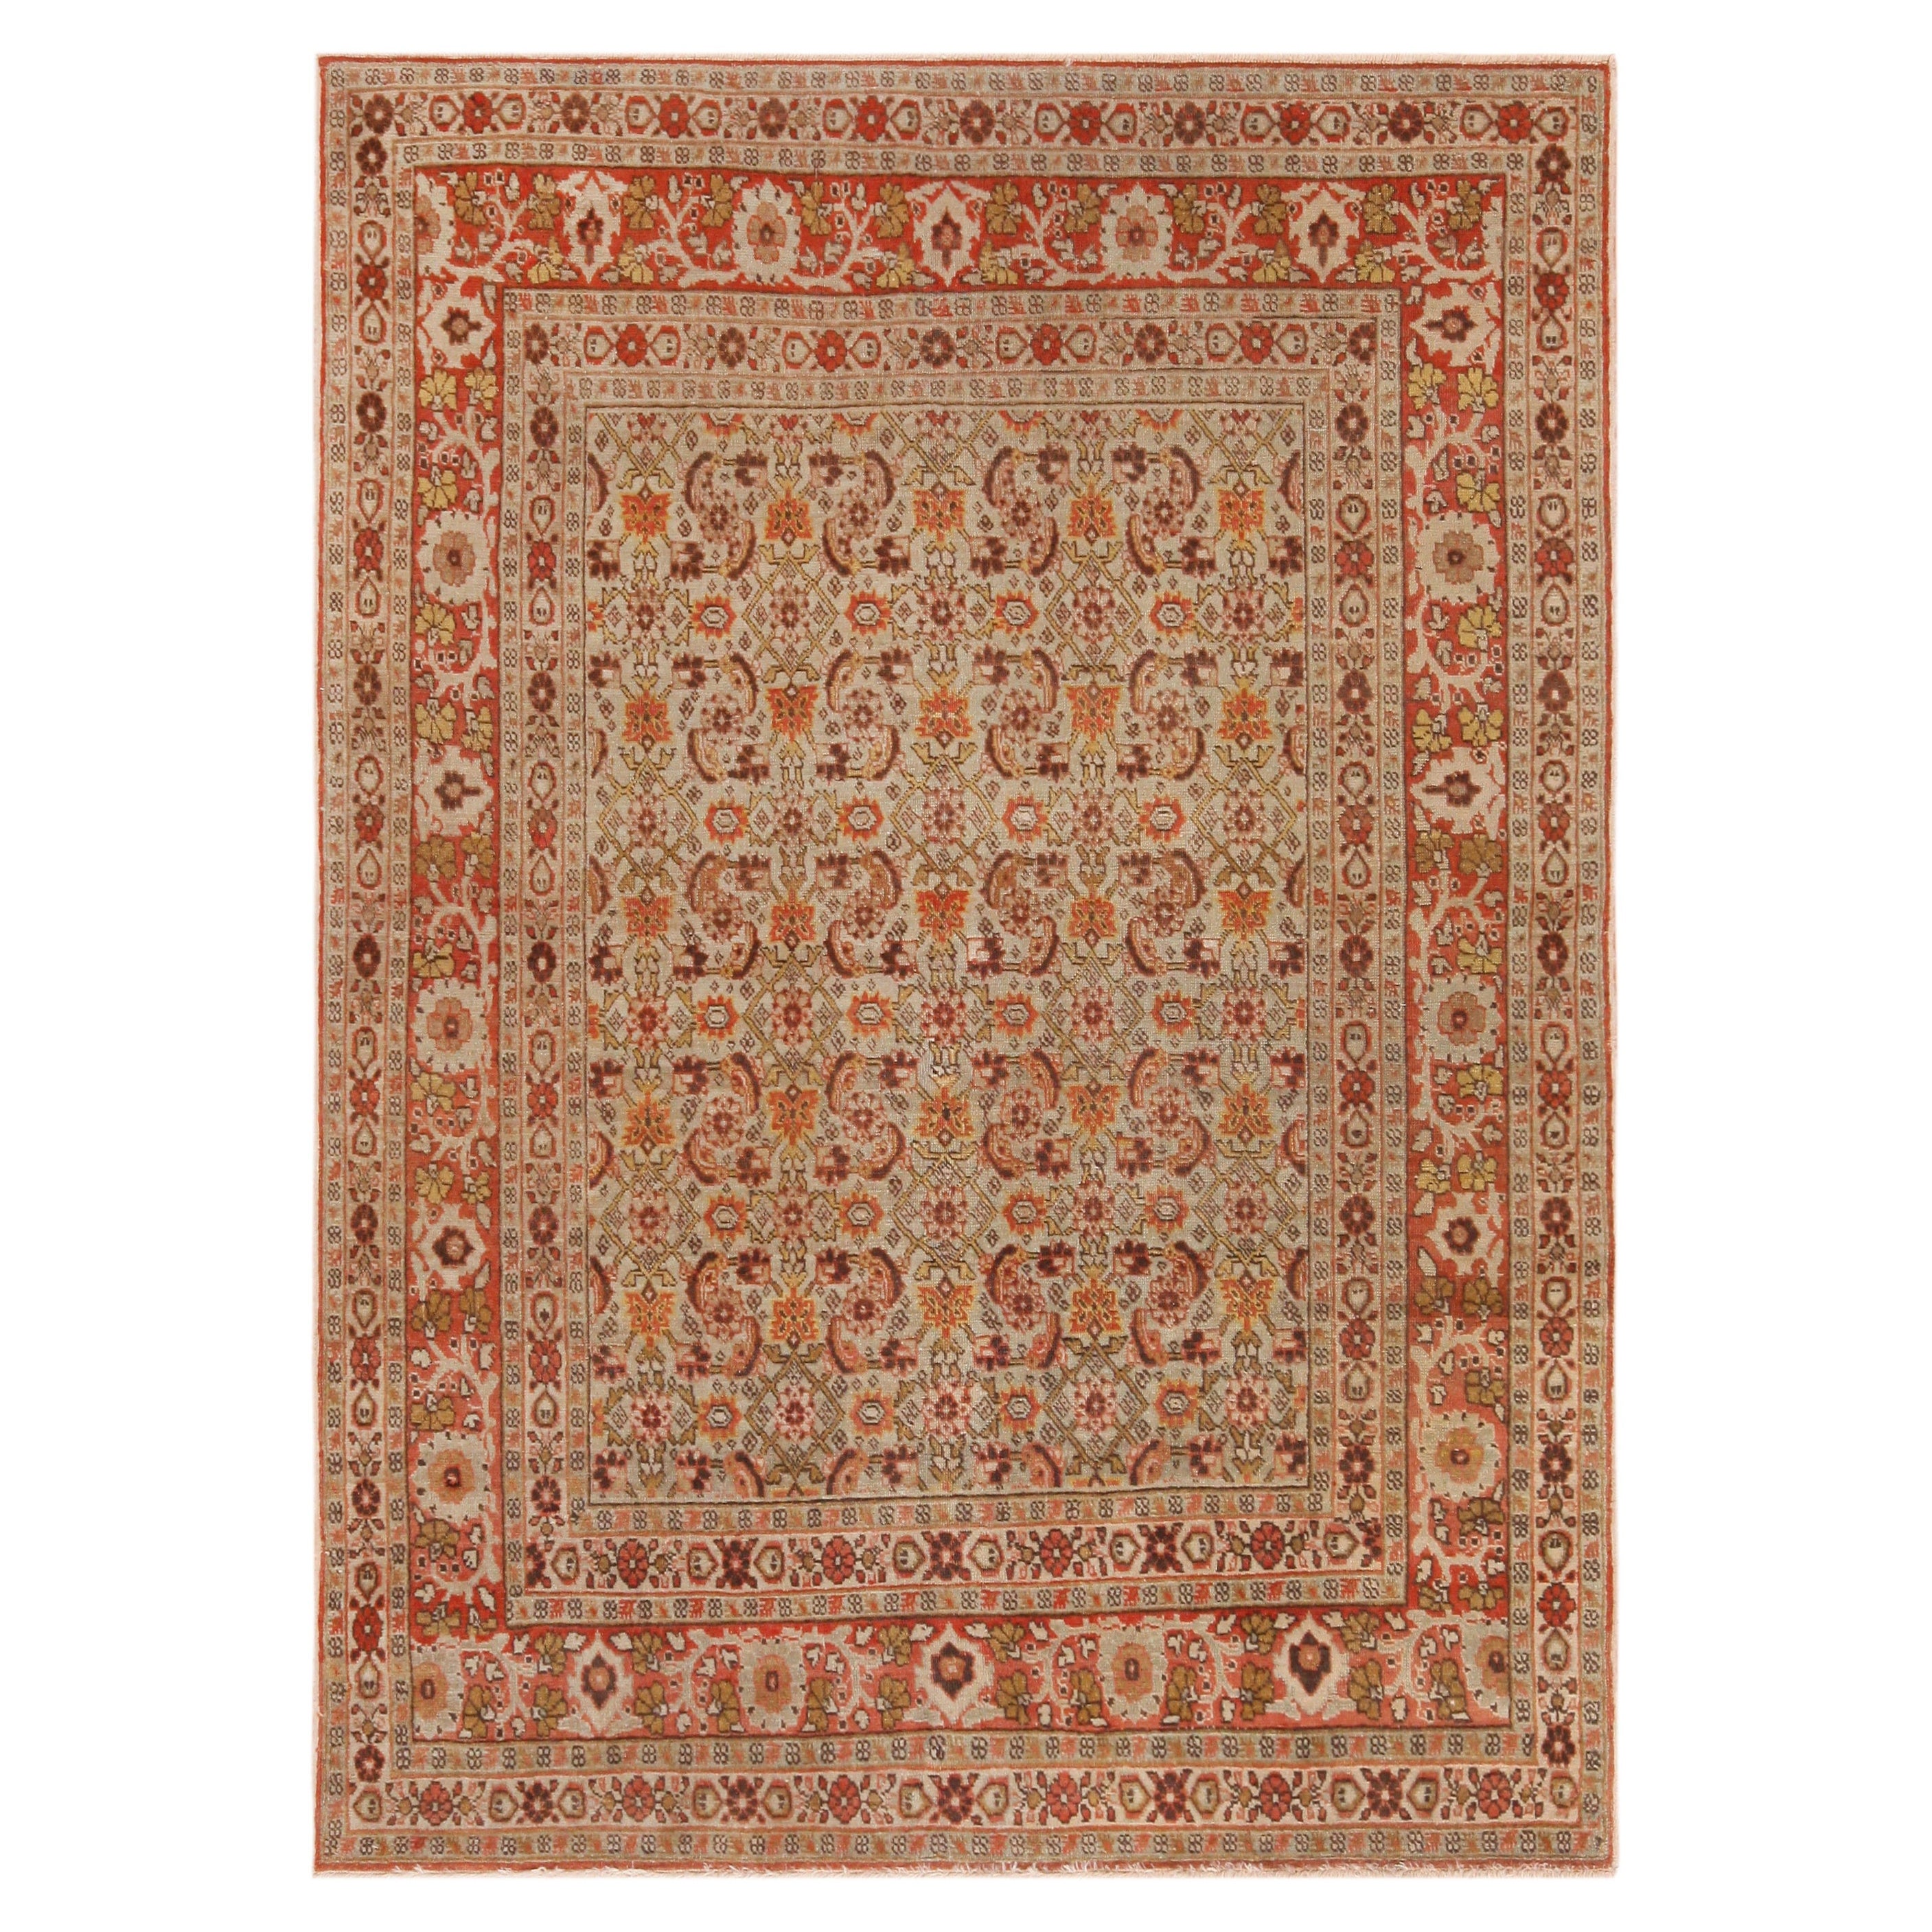 Nazmiyal Collection Antique Persian Tabriz Herati Rug. 4 ft 2 in x 5 ft 9 in